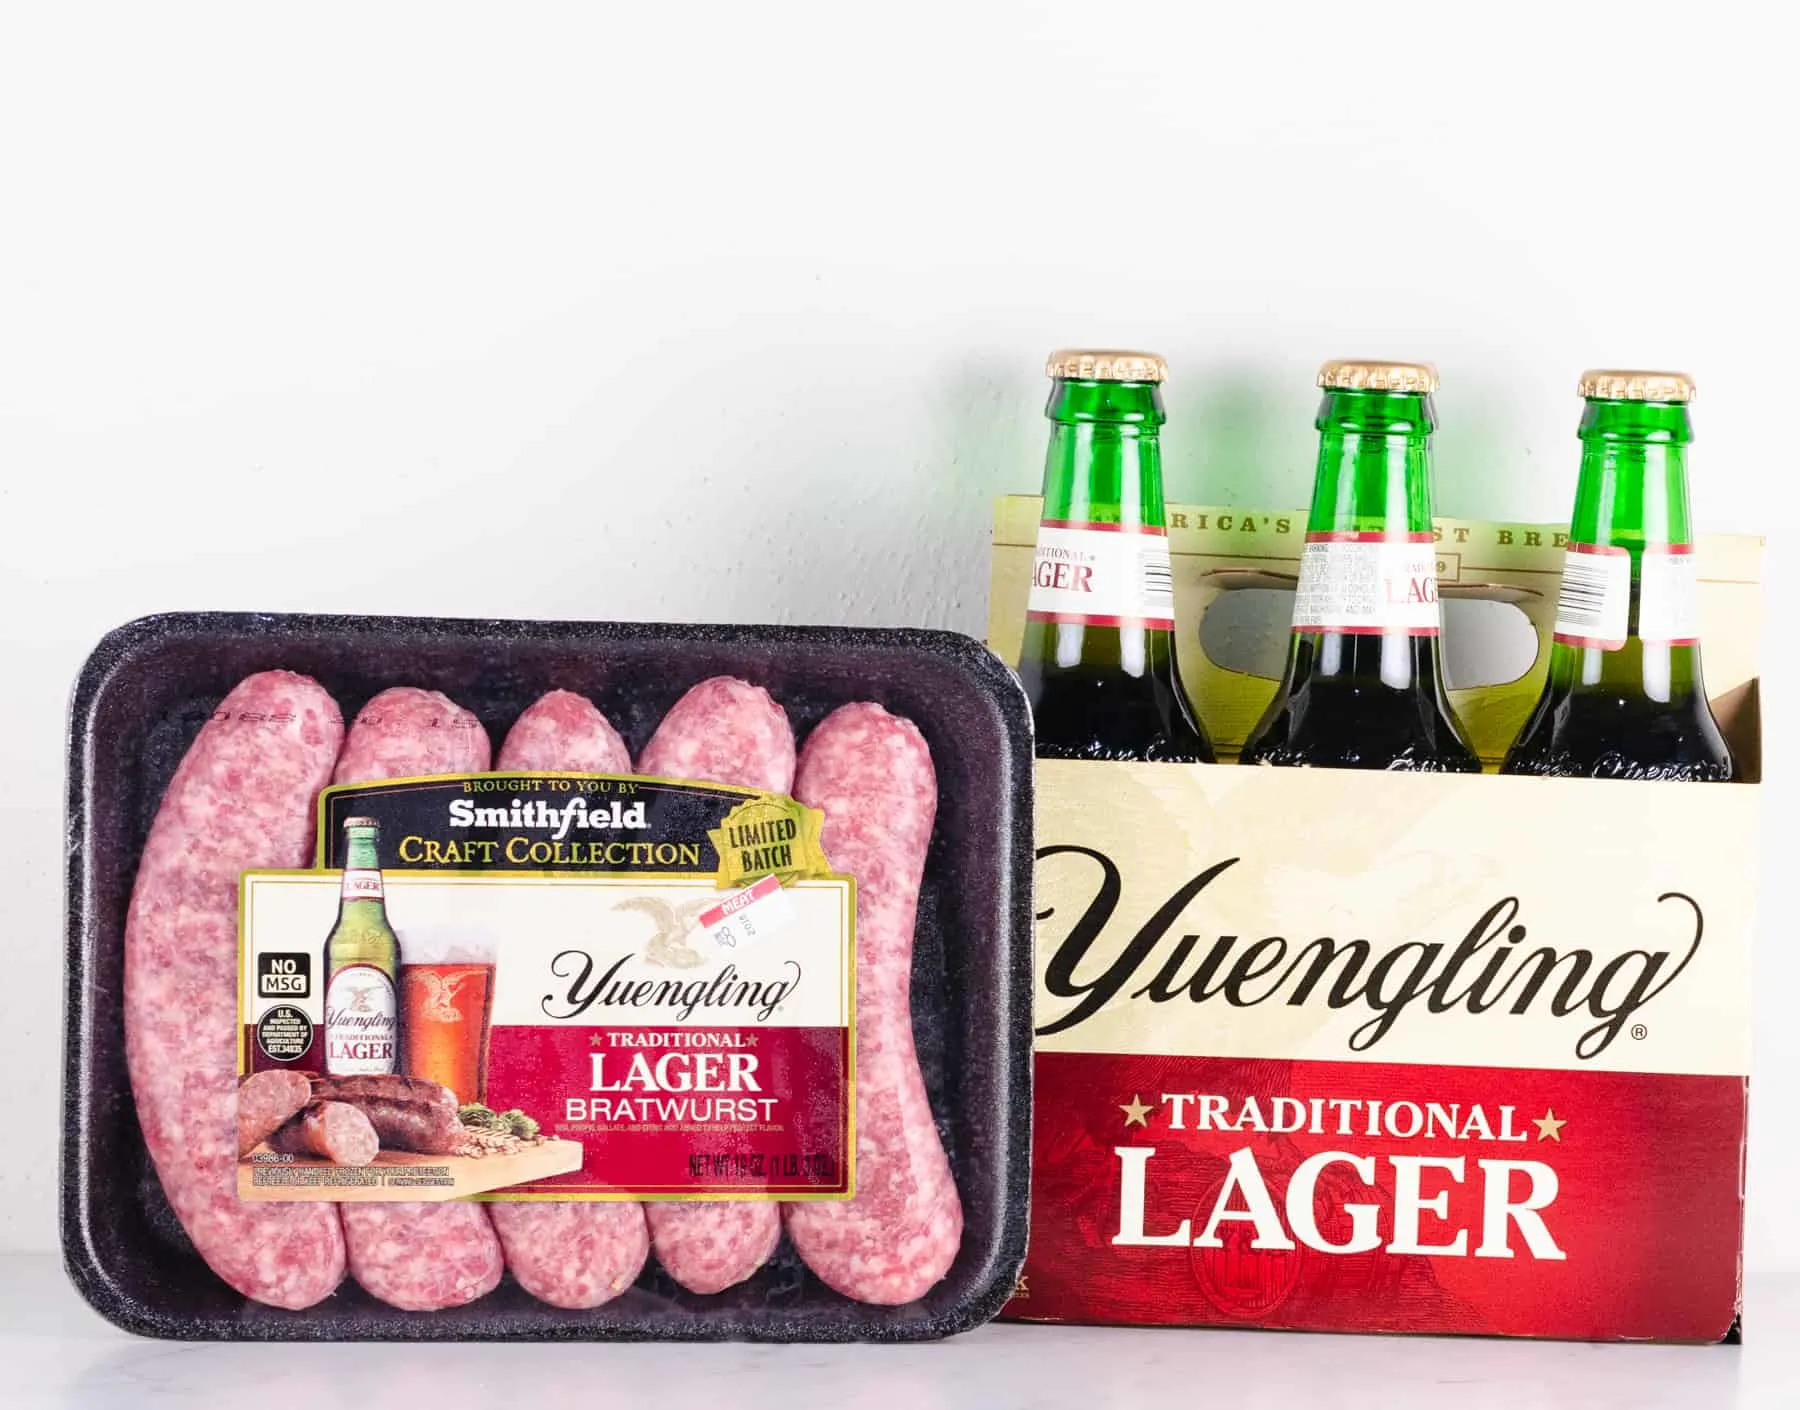 Raw Yuengling Lager Bratwurst with a 6-pack of Yuengling traditional lager